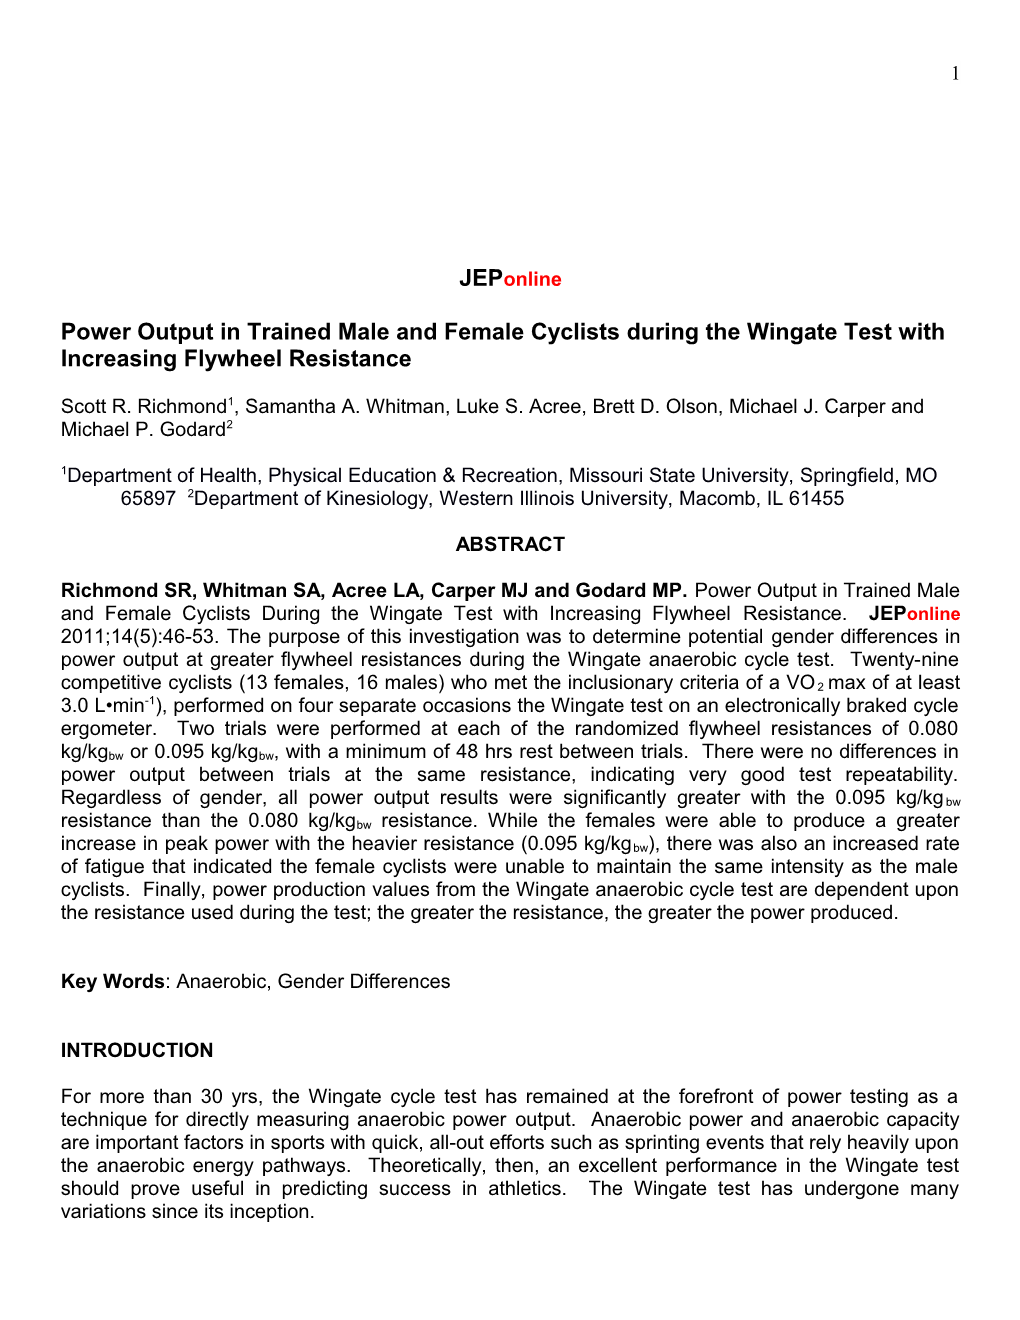 Power Output in Trained Male and Female Cyclists During the Wingate Test with Increasing